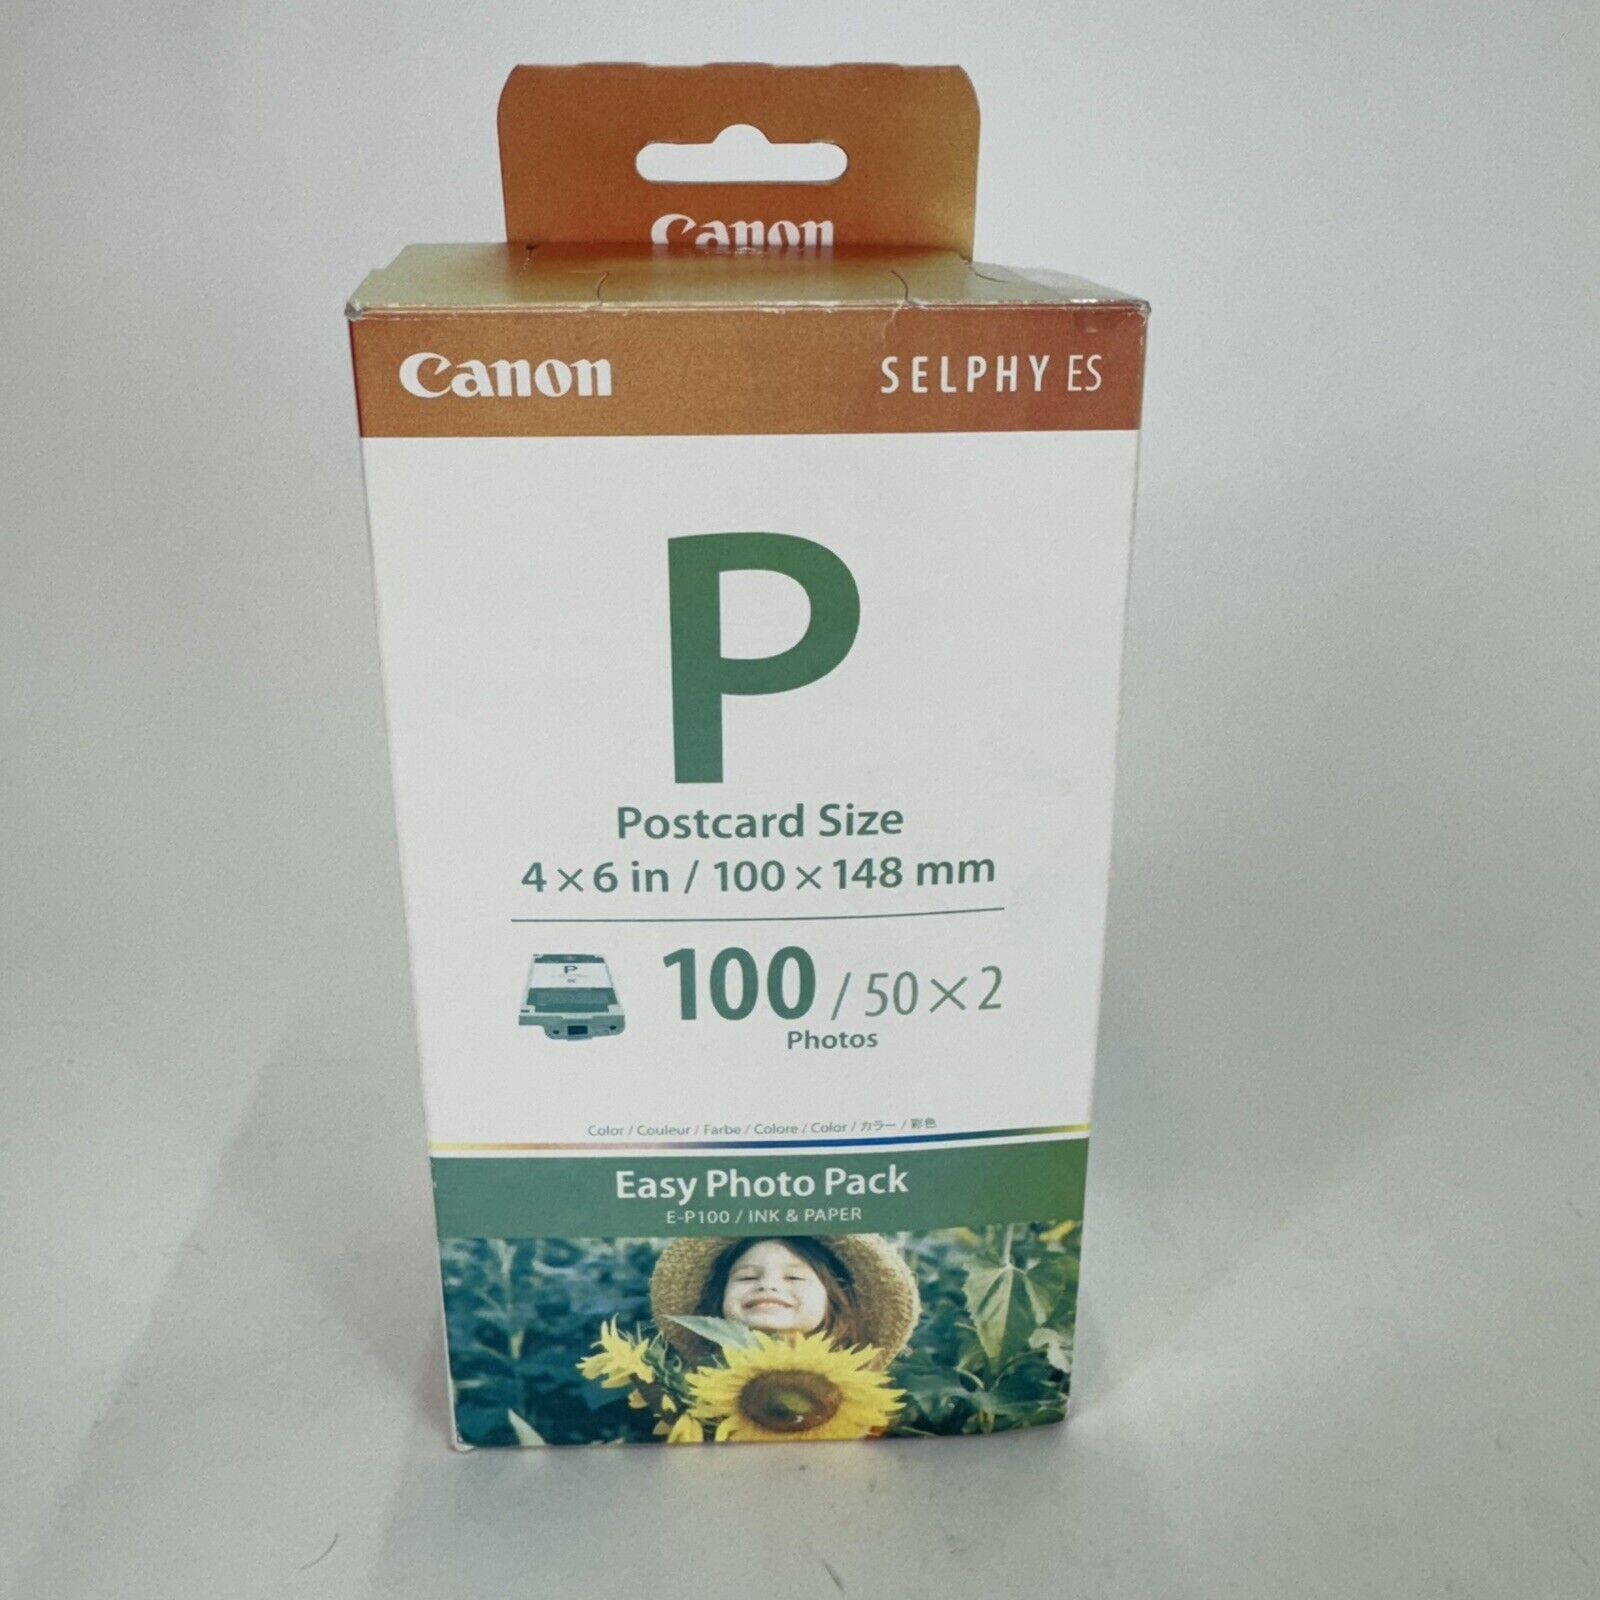 CANON Easy Photo Pack E-P100 Ink & Paper SELPHY ES Postcard Size 4”x6” 100 PACK